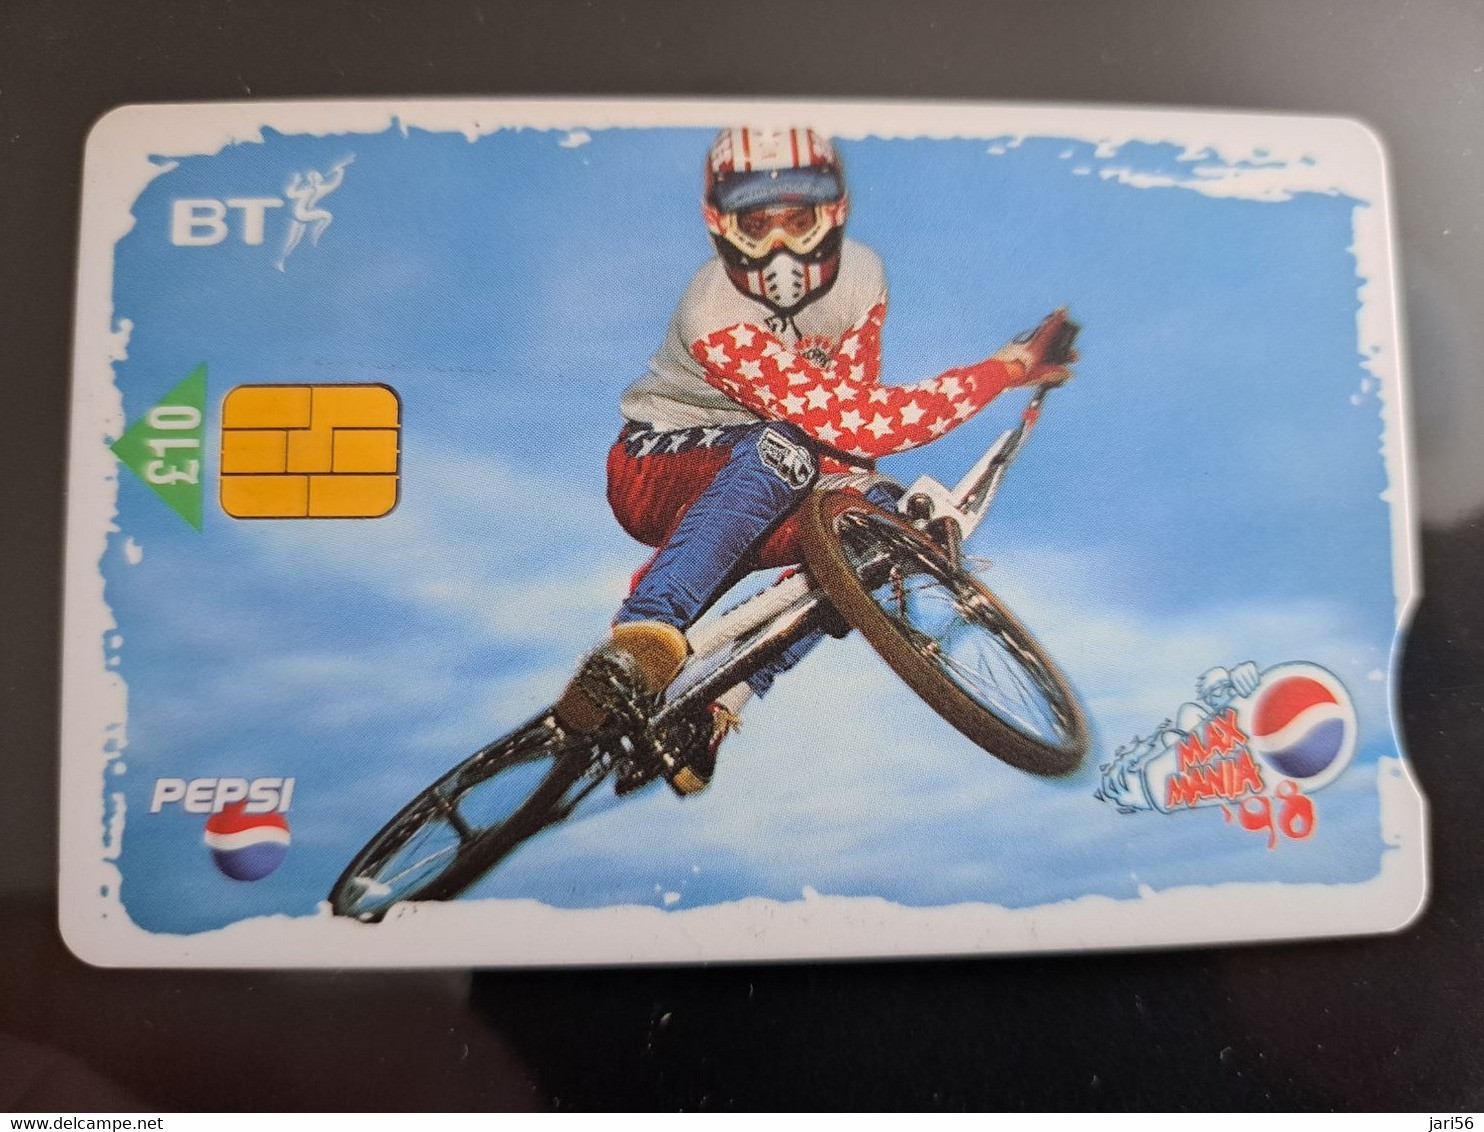 GREAT BRETAGNE  CHIPCARDS / PEPSI/EXTREME SPORTS /NATIONAL EXPRESS       10 POUND   USED  CONDITION      **11930** - BT General